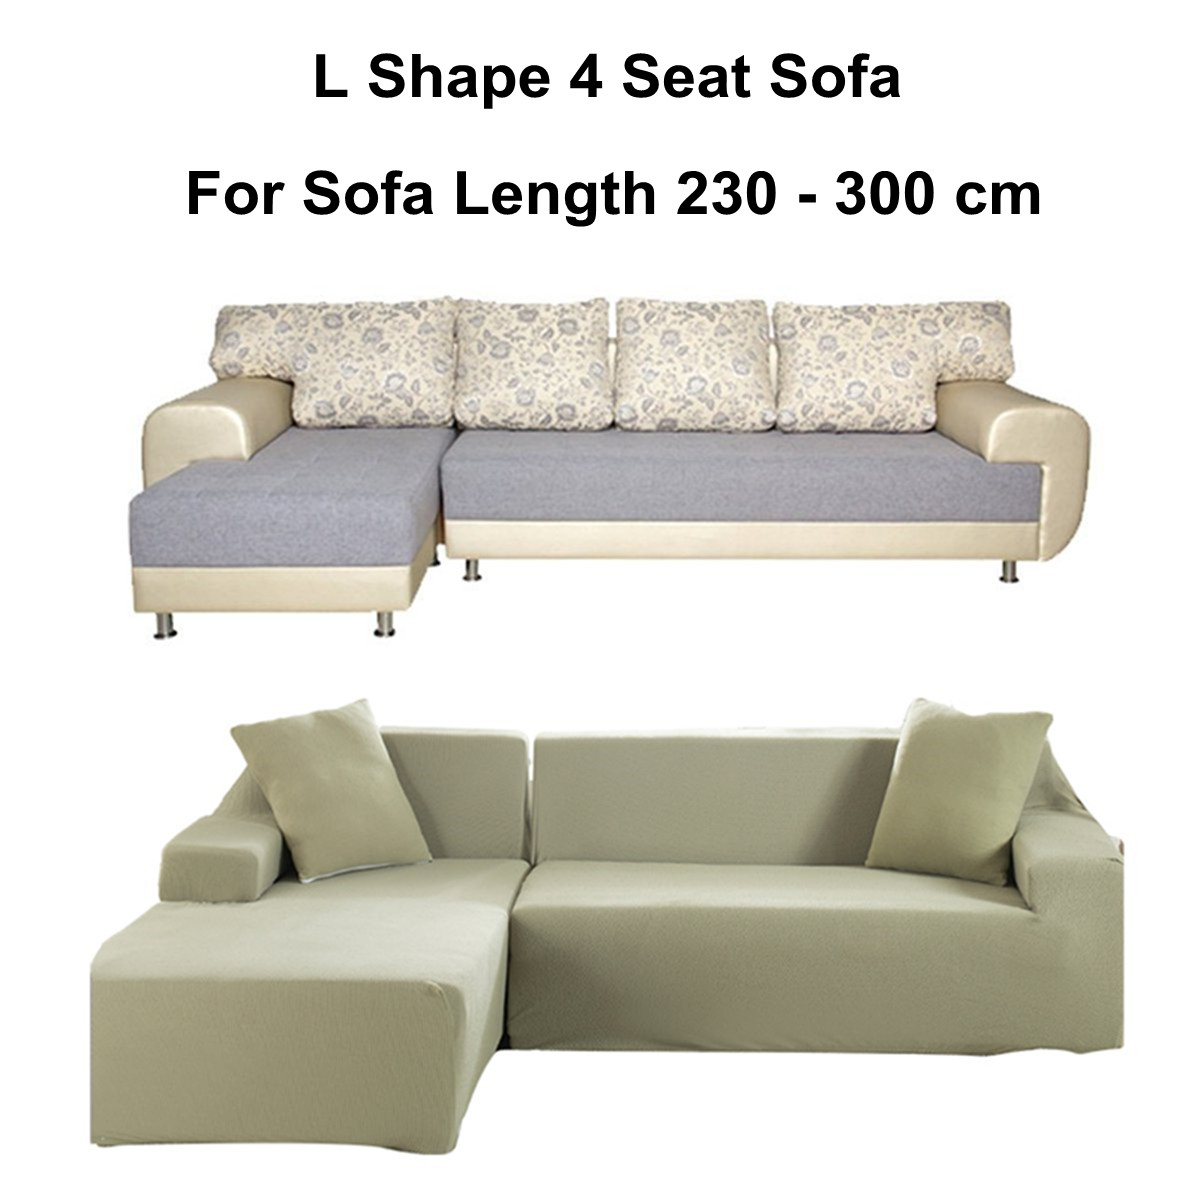 L-Shape-Couch-Cover-Stretch-Elastic-Fabric-Sofa-Cover-Pet-Sectional-Corner-Chair-Covers-1507970-4